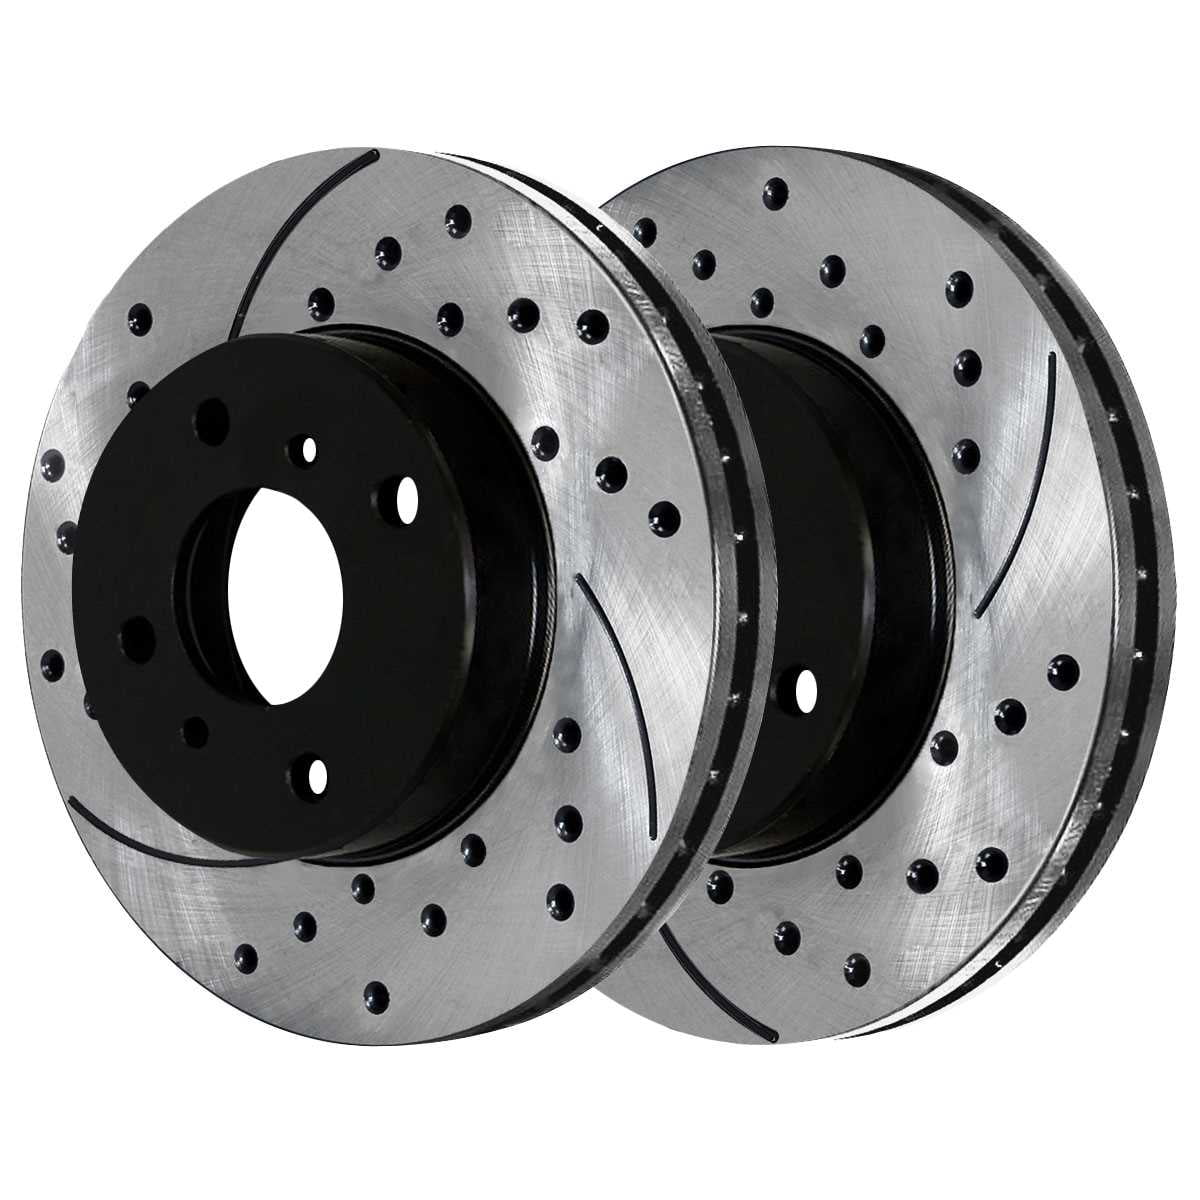 1999 2000 2001 Fits Nissan Altima OE Replacement Rotors Metallic Pads F 